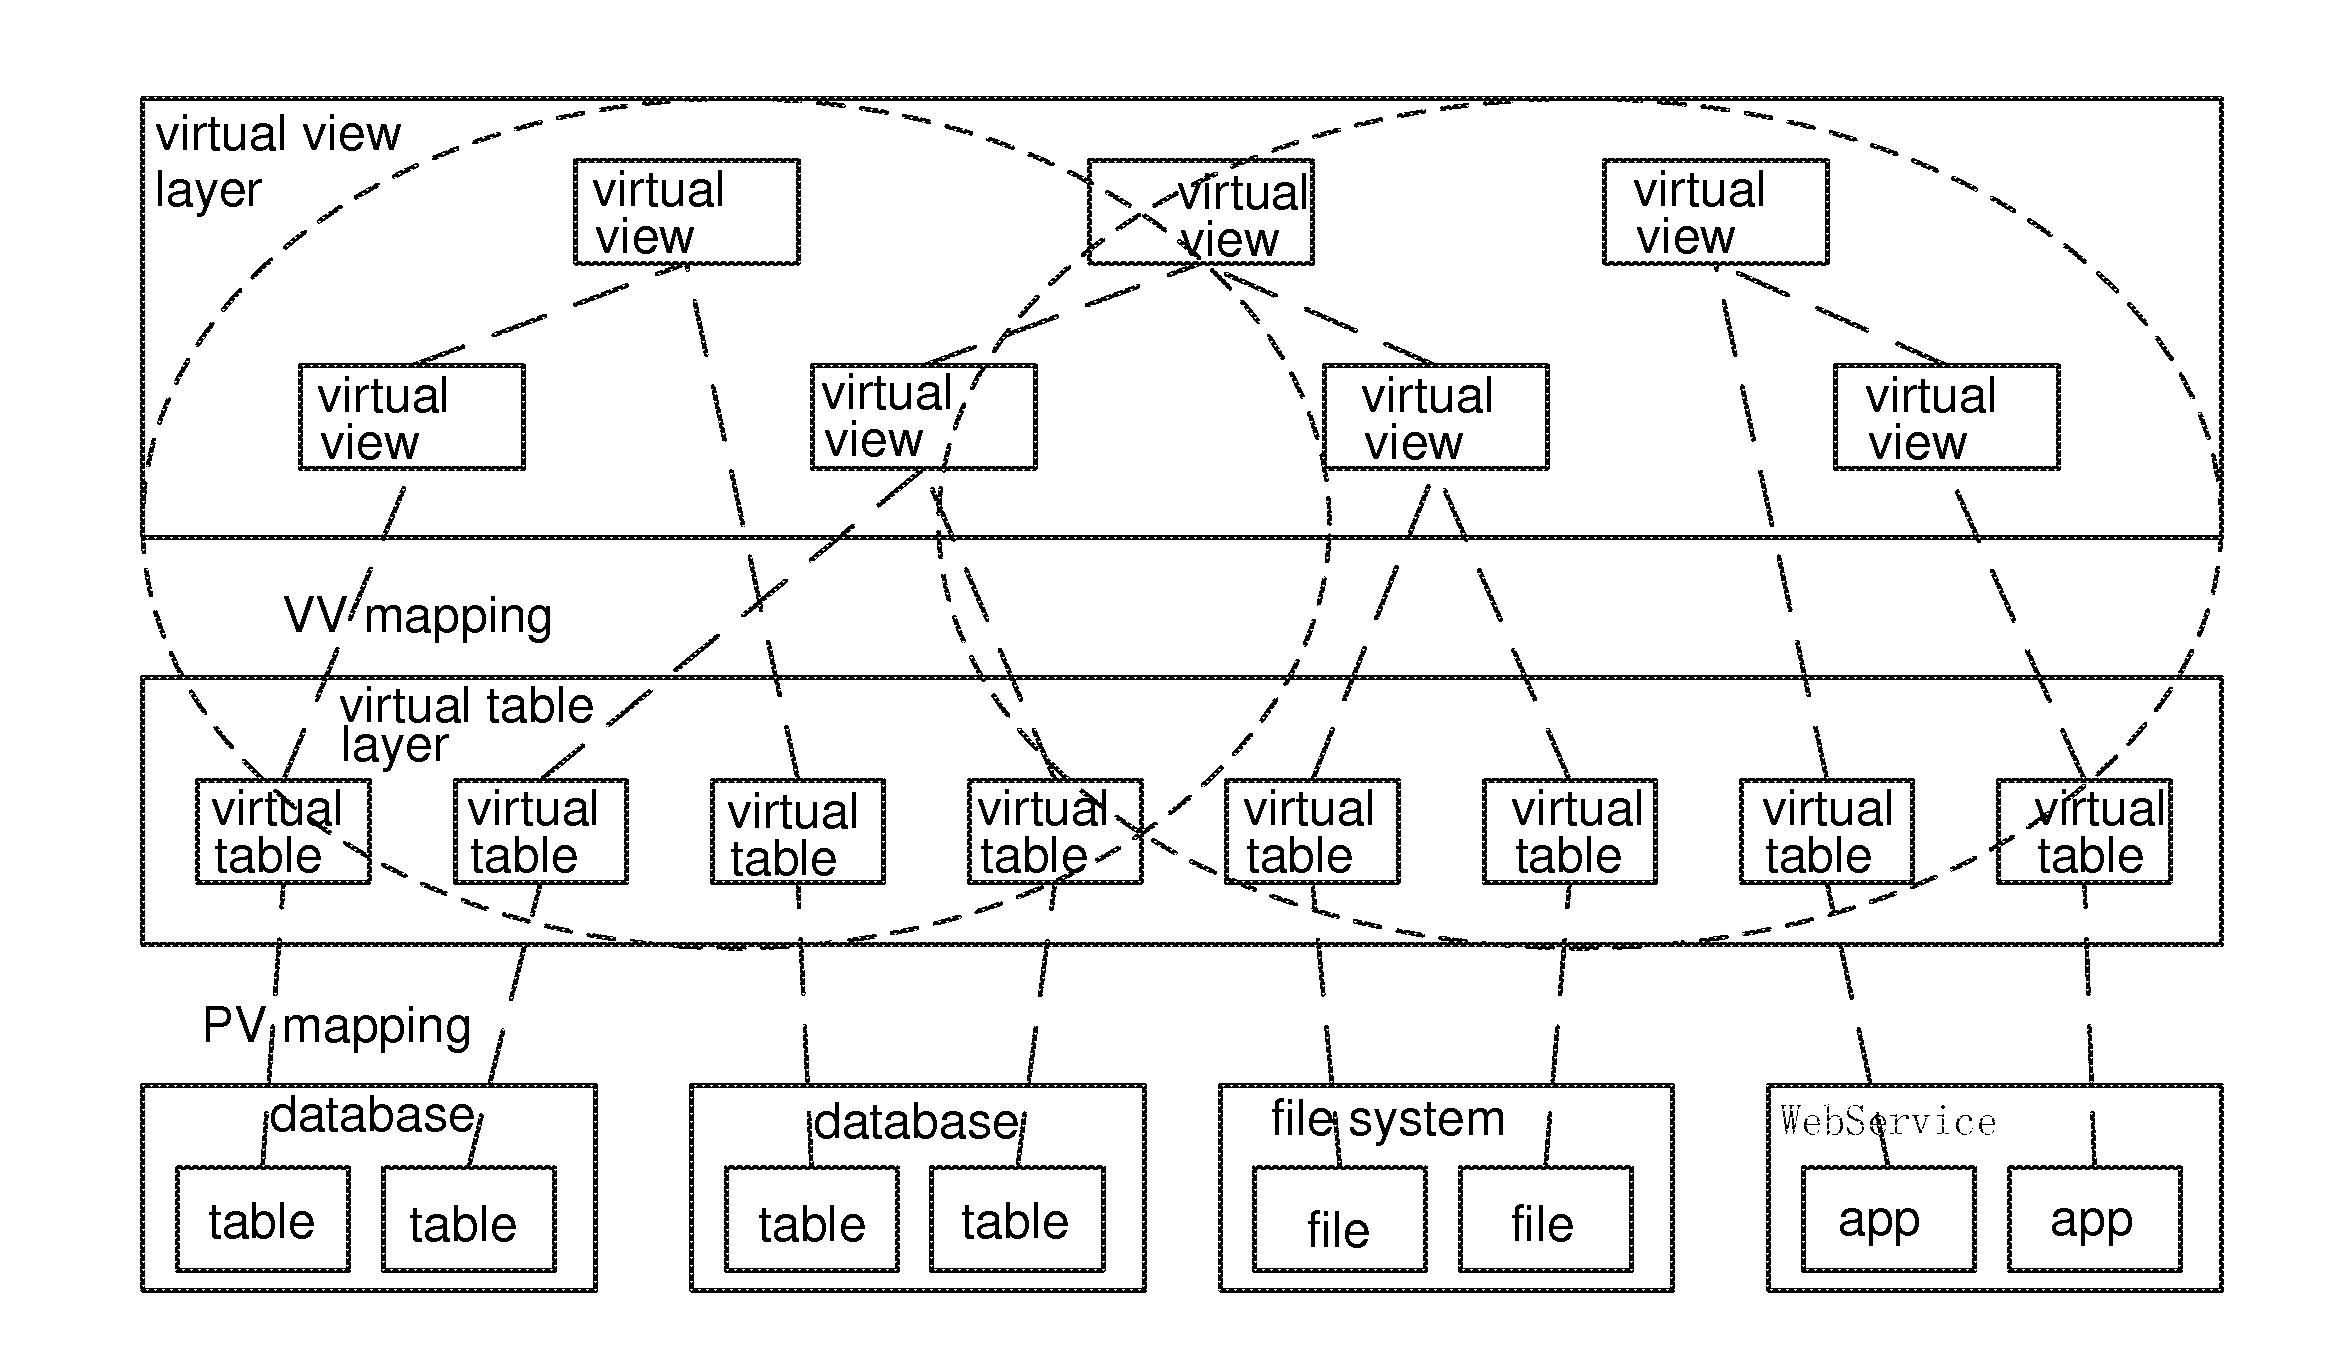 Virtualization method for large-scale distributed heterogeneous data